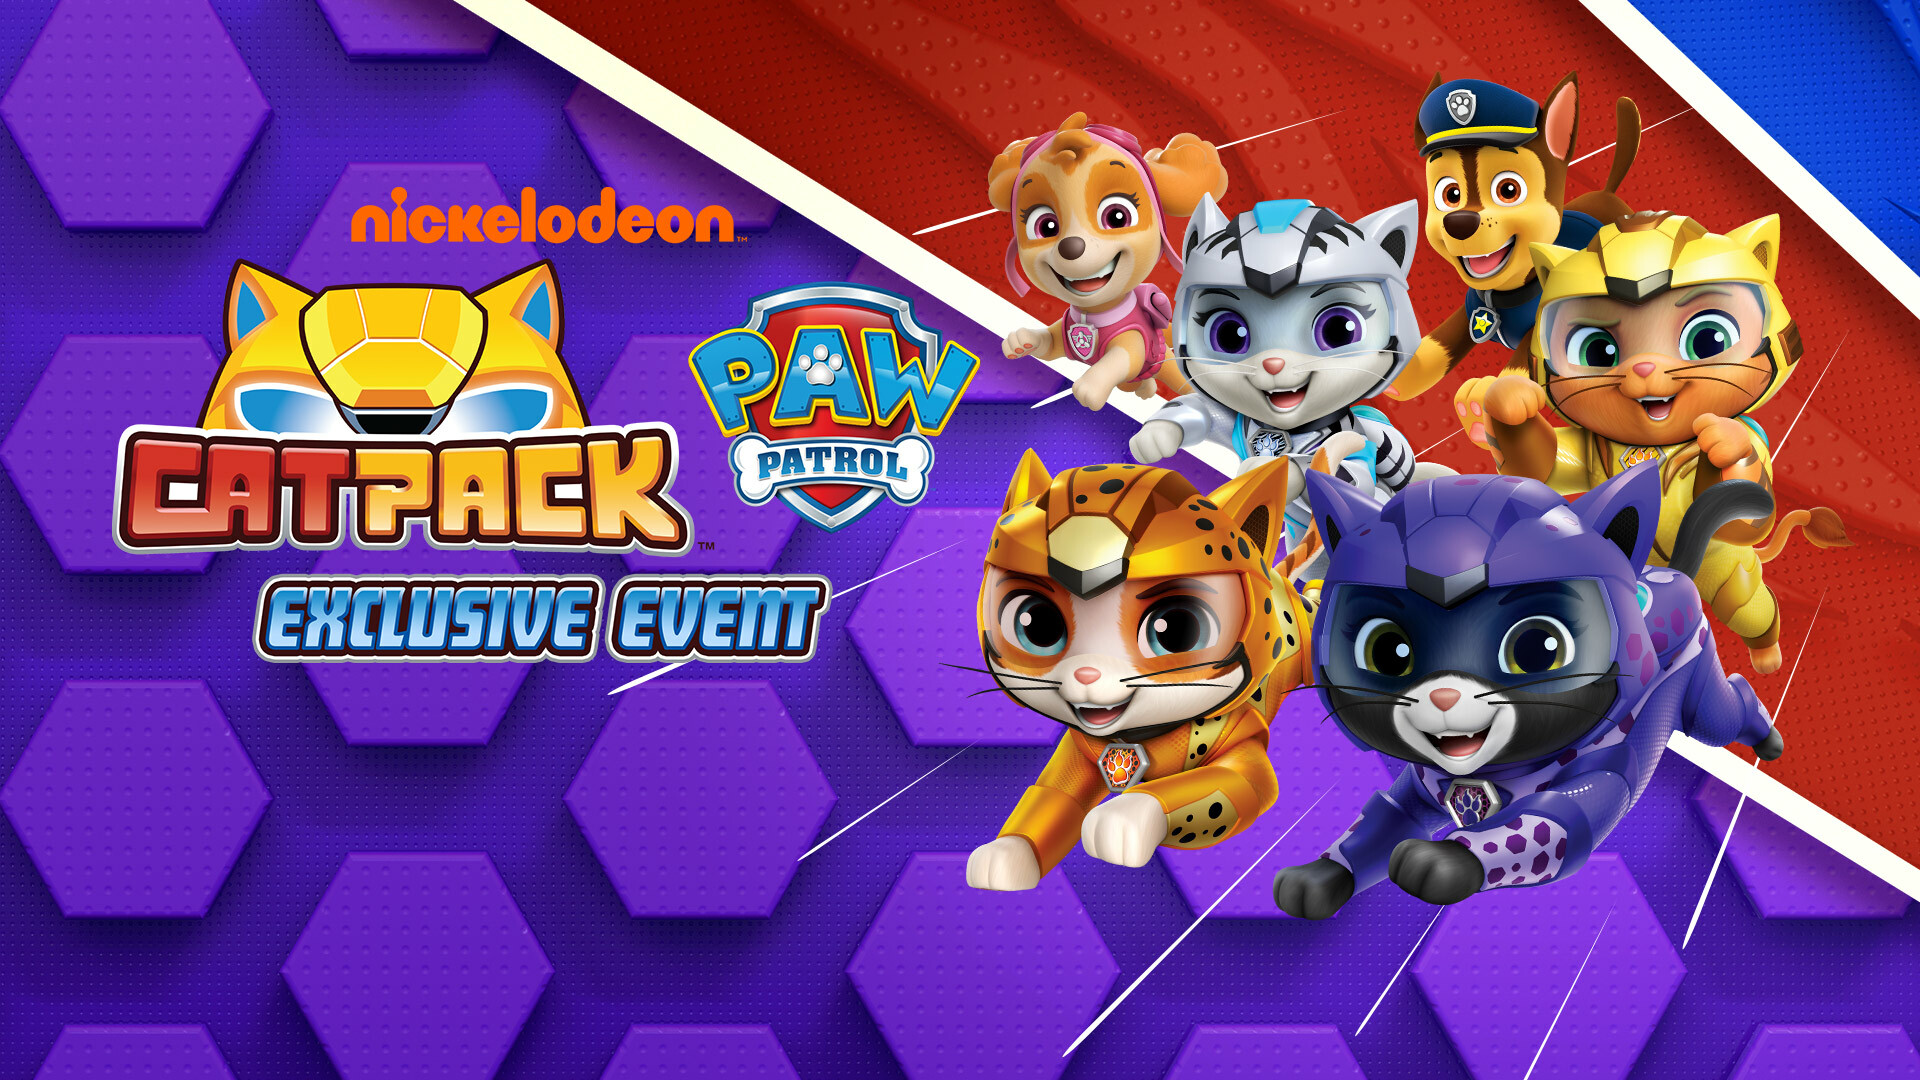 Cat Pack: A PAW Patrol Exclusive Event Full Movie on Paramount Plus